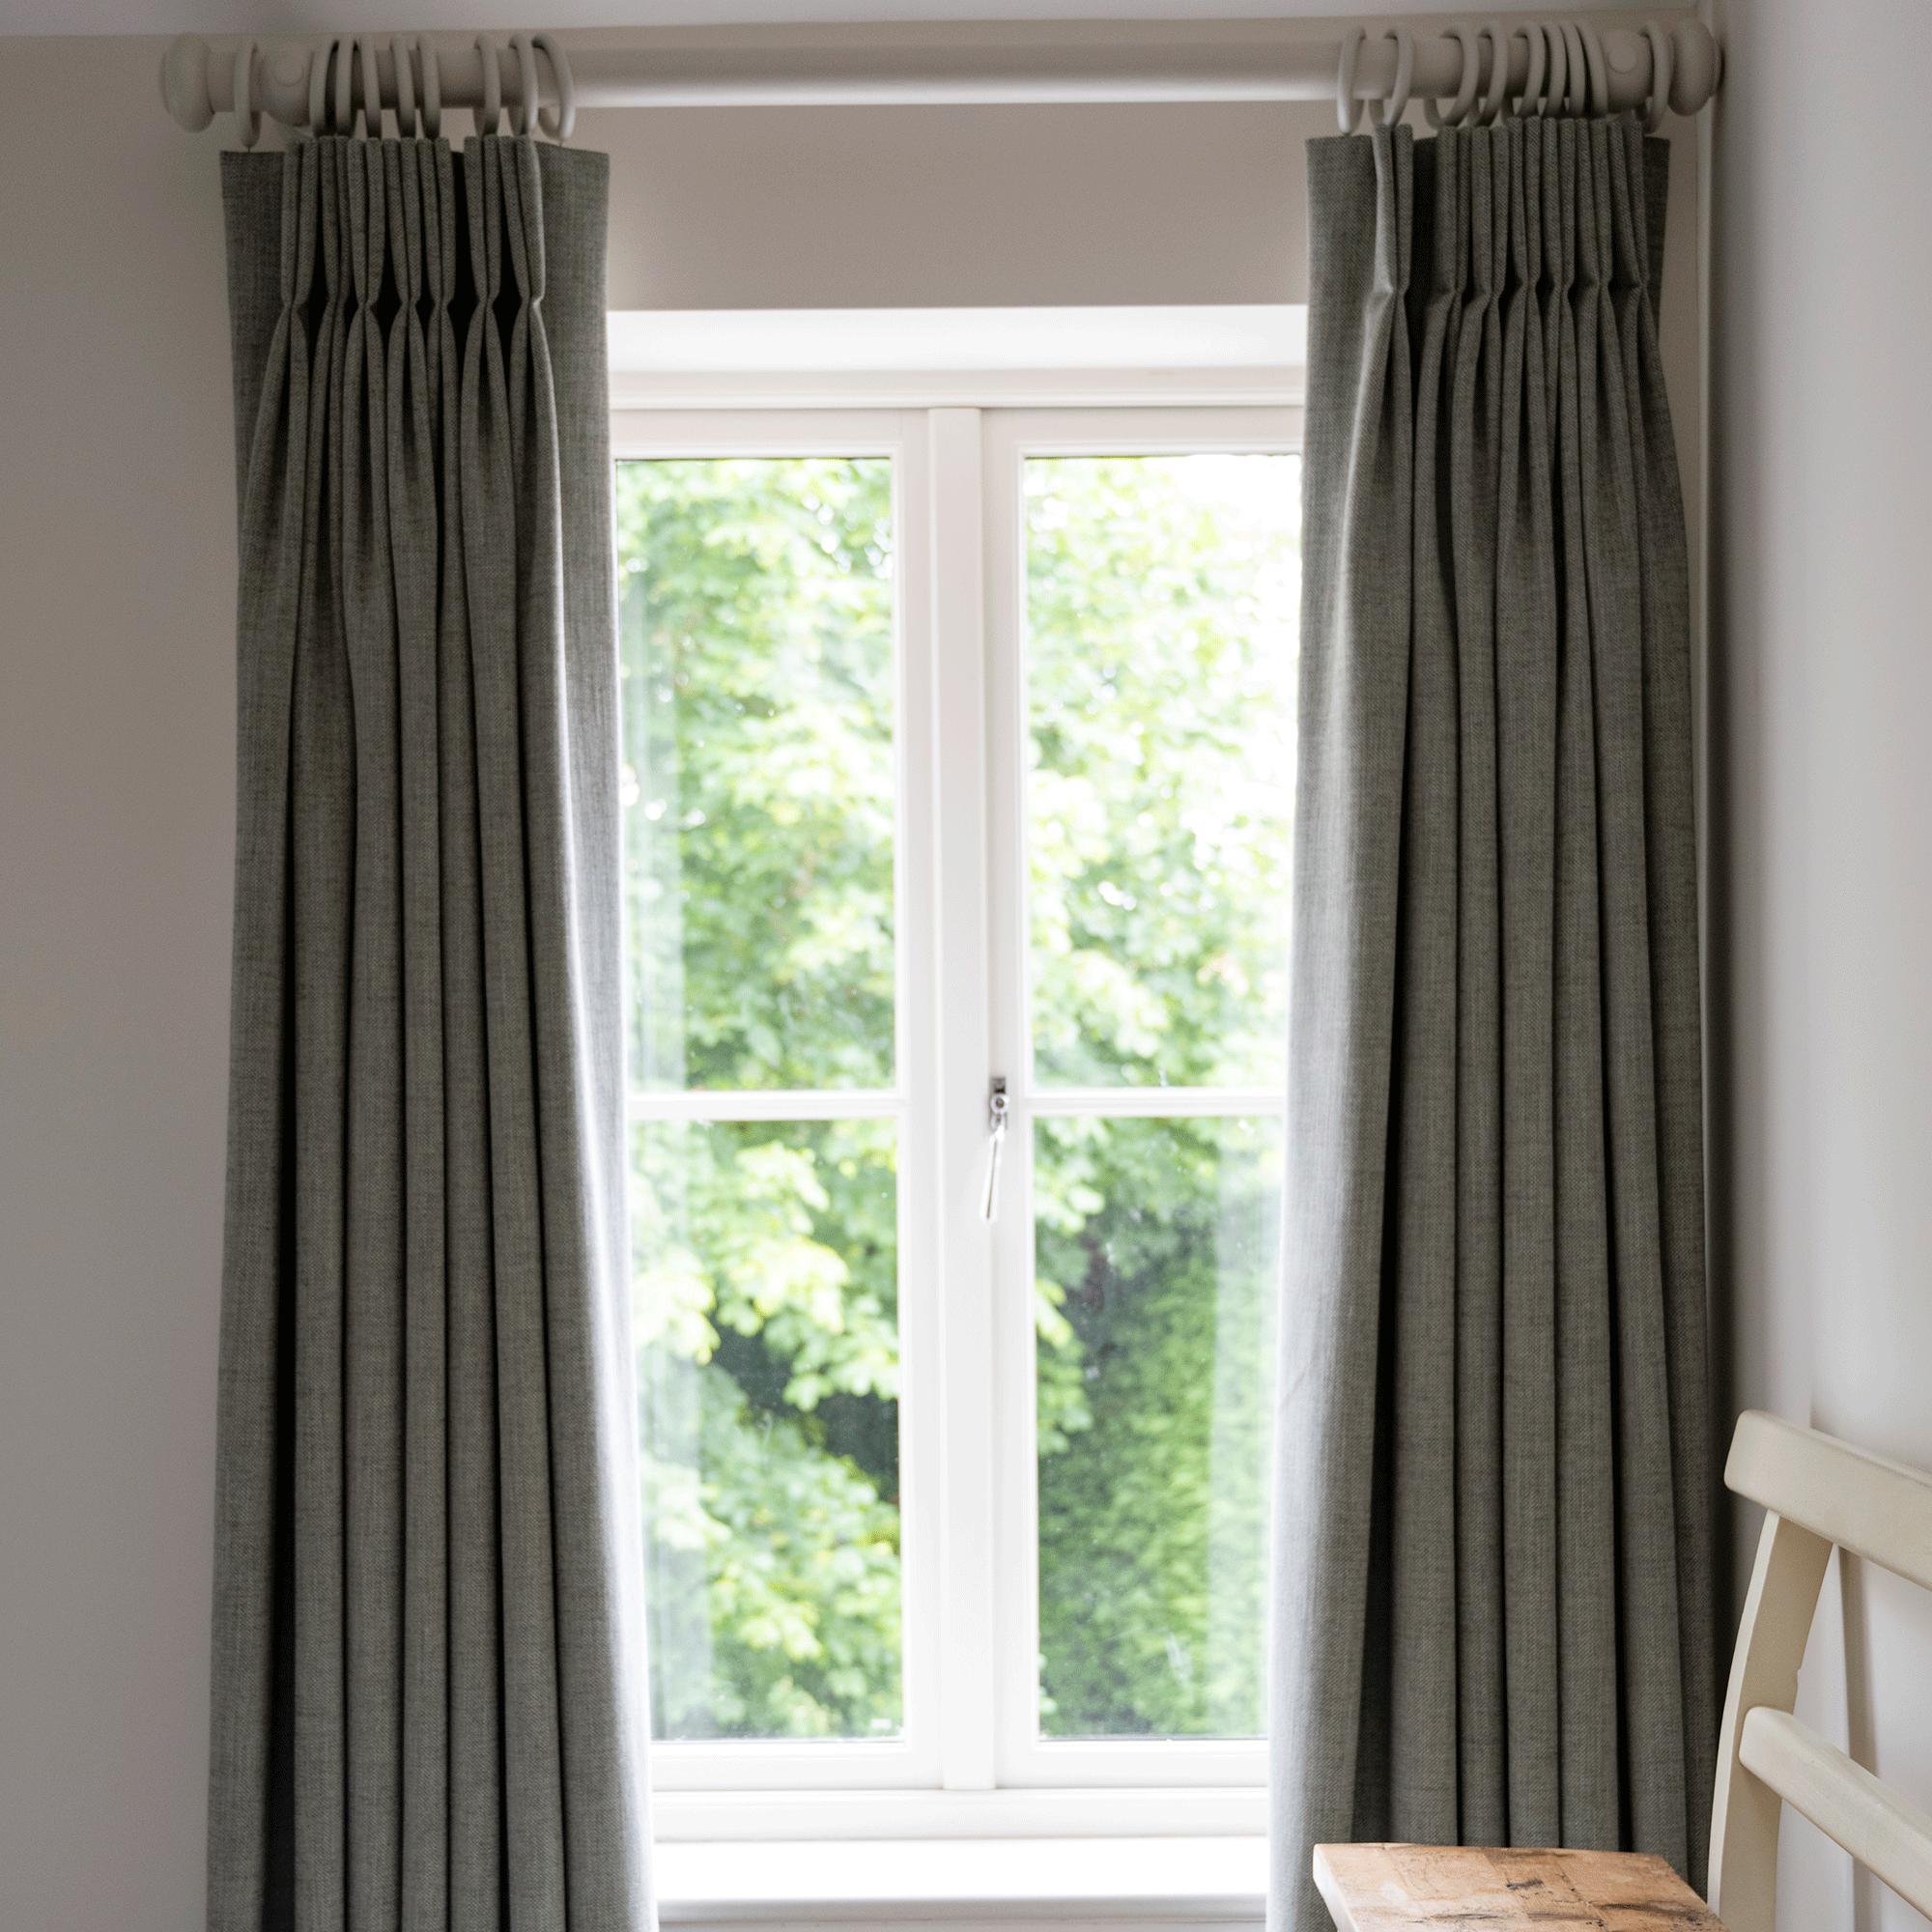 How to clean curtains - easy ways to refresh your curtains without damaging them